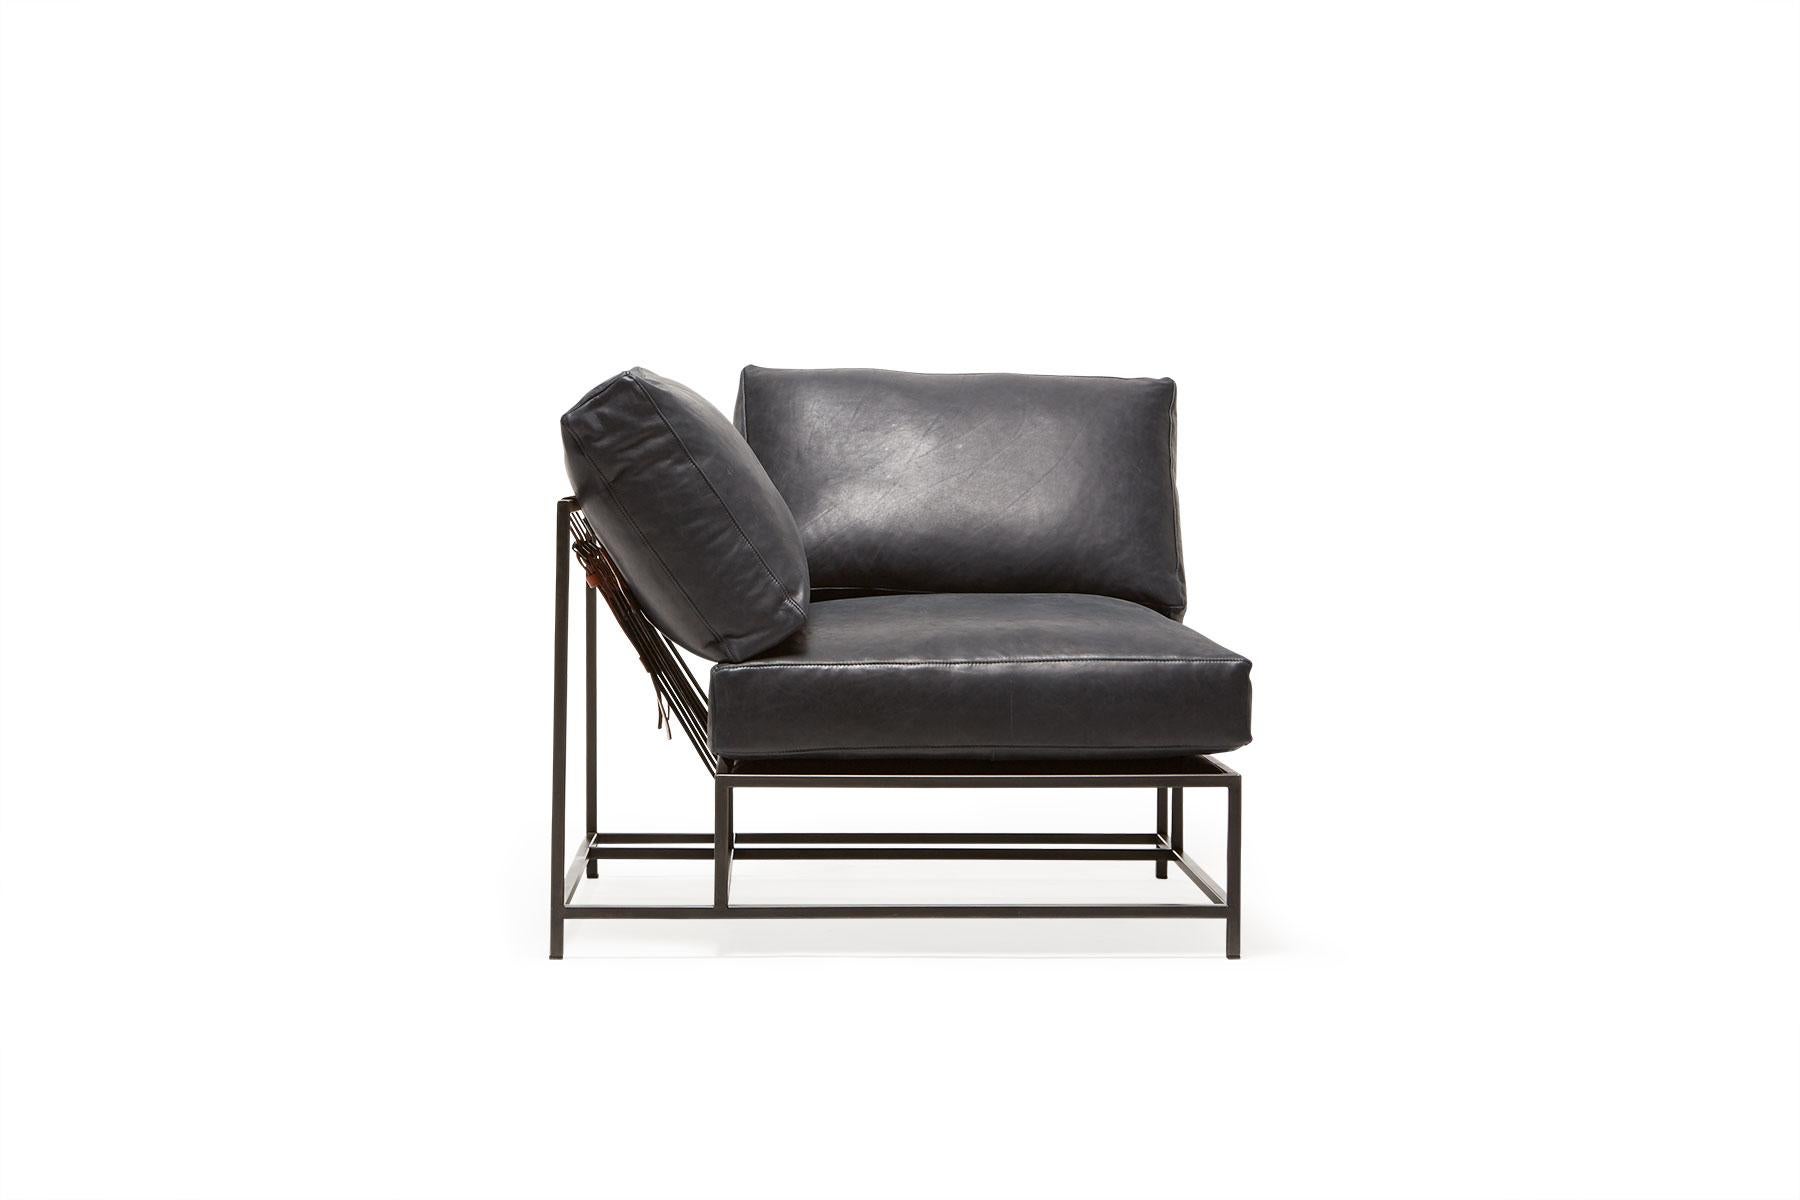 The inheritance corner chair can be used as a standalone piece, or as part of a modular sectional with other inheritance pieces.
This variation is upholstered in a dark blue smoke leather. The foam seat cushions have been wrapped in down, allowing